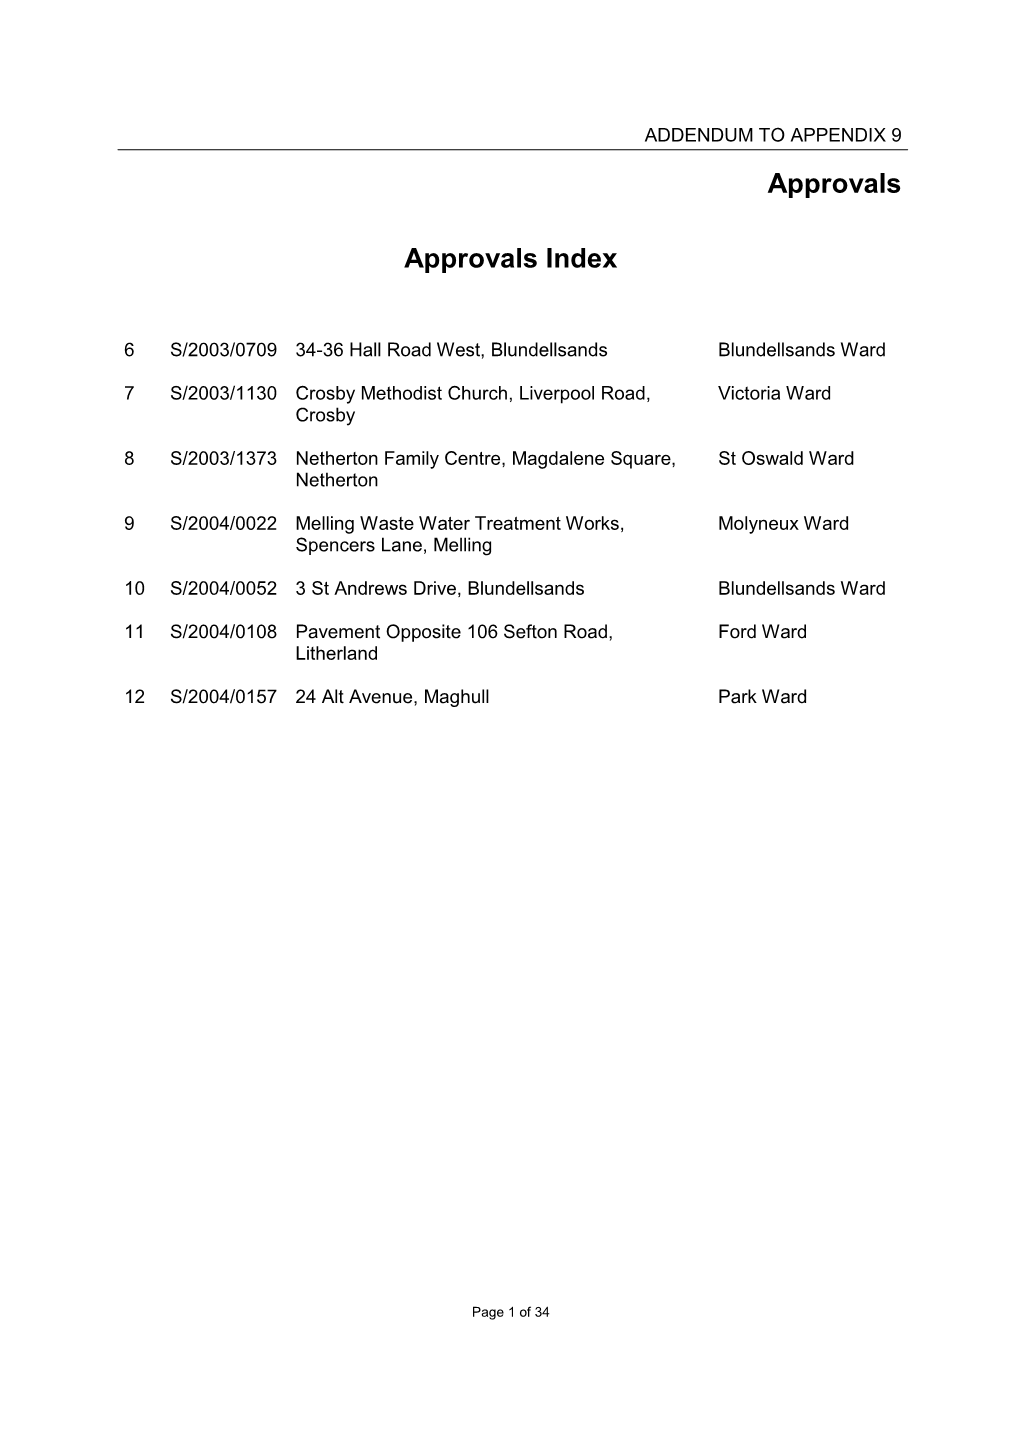 Approvals Approvals Index